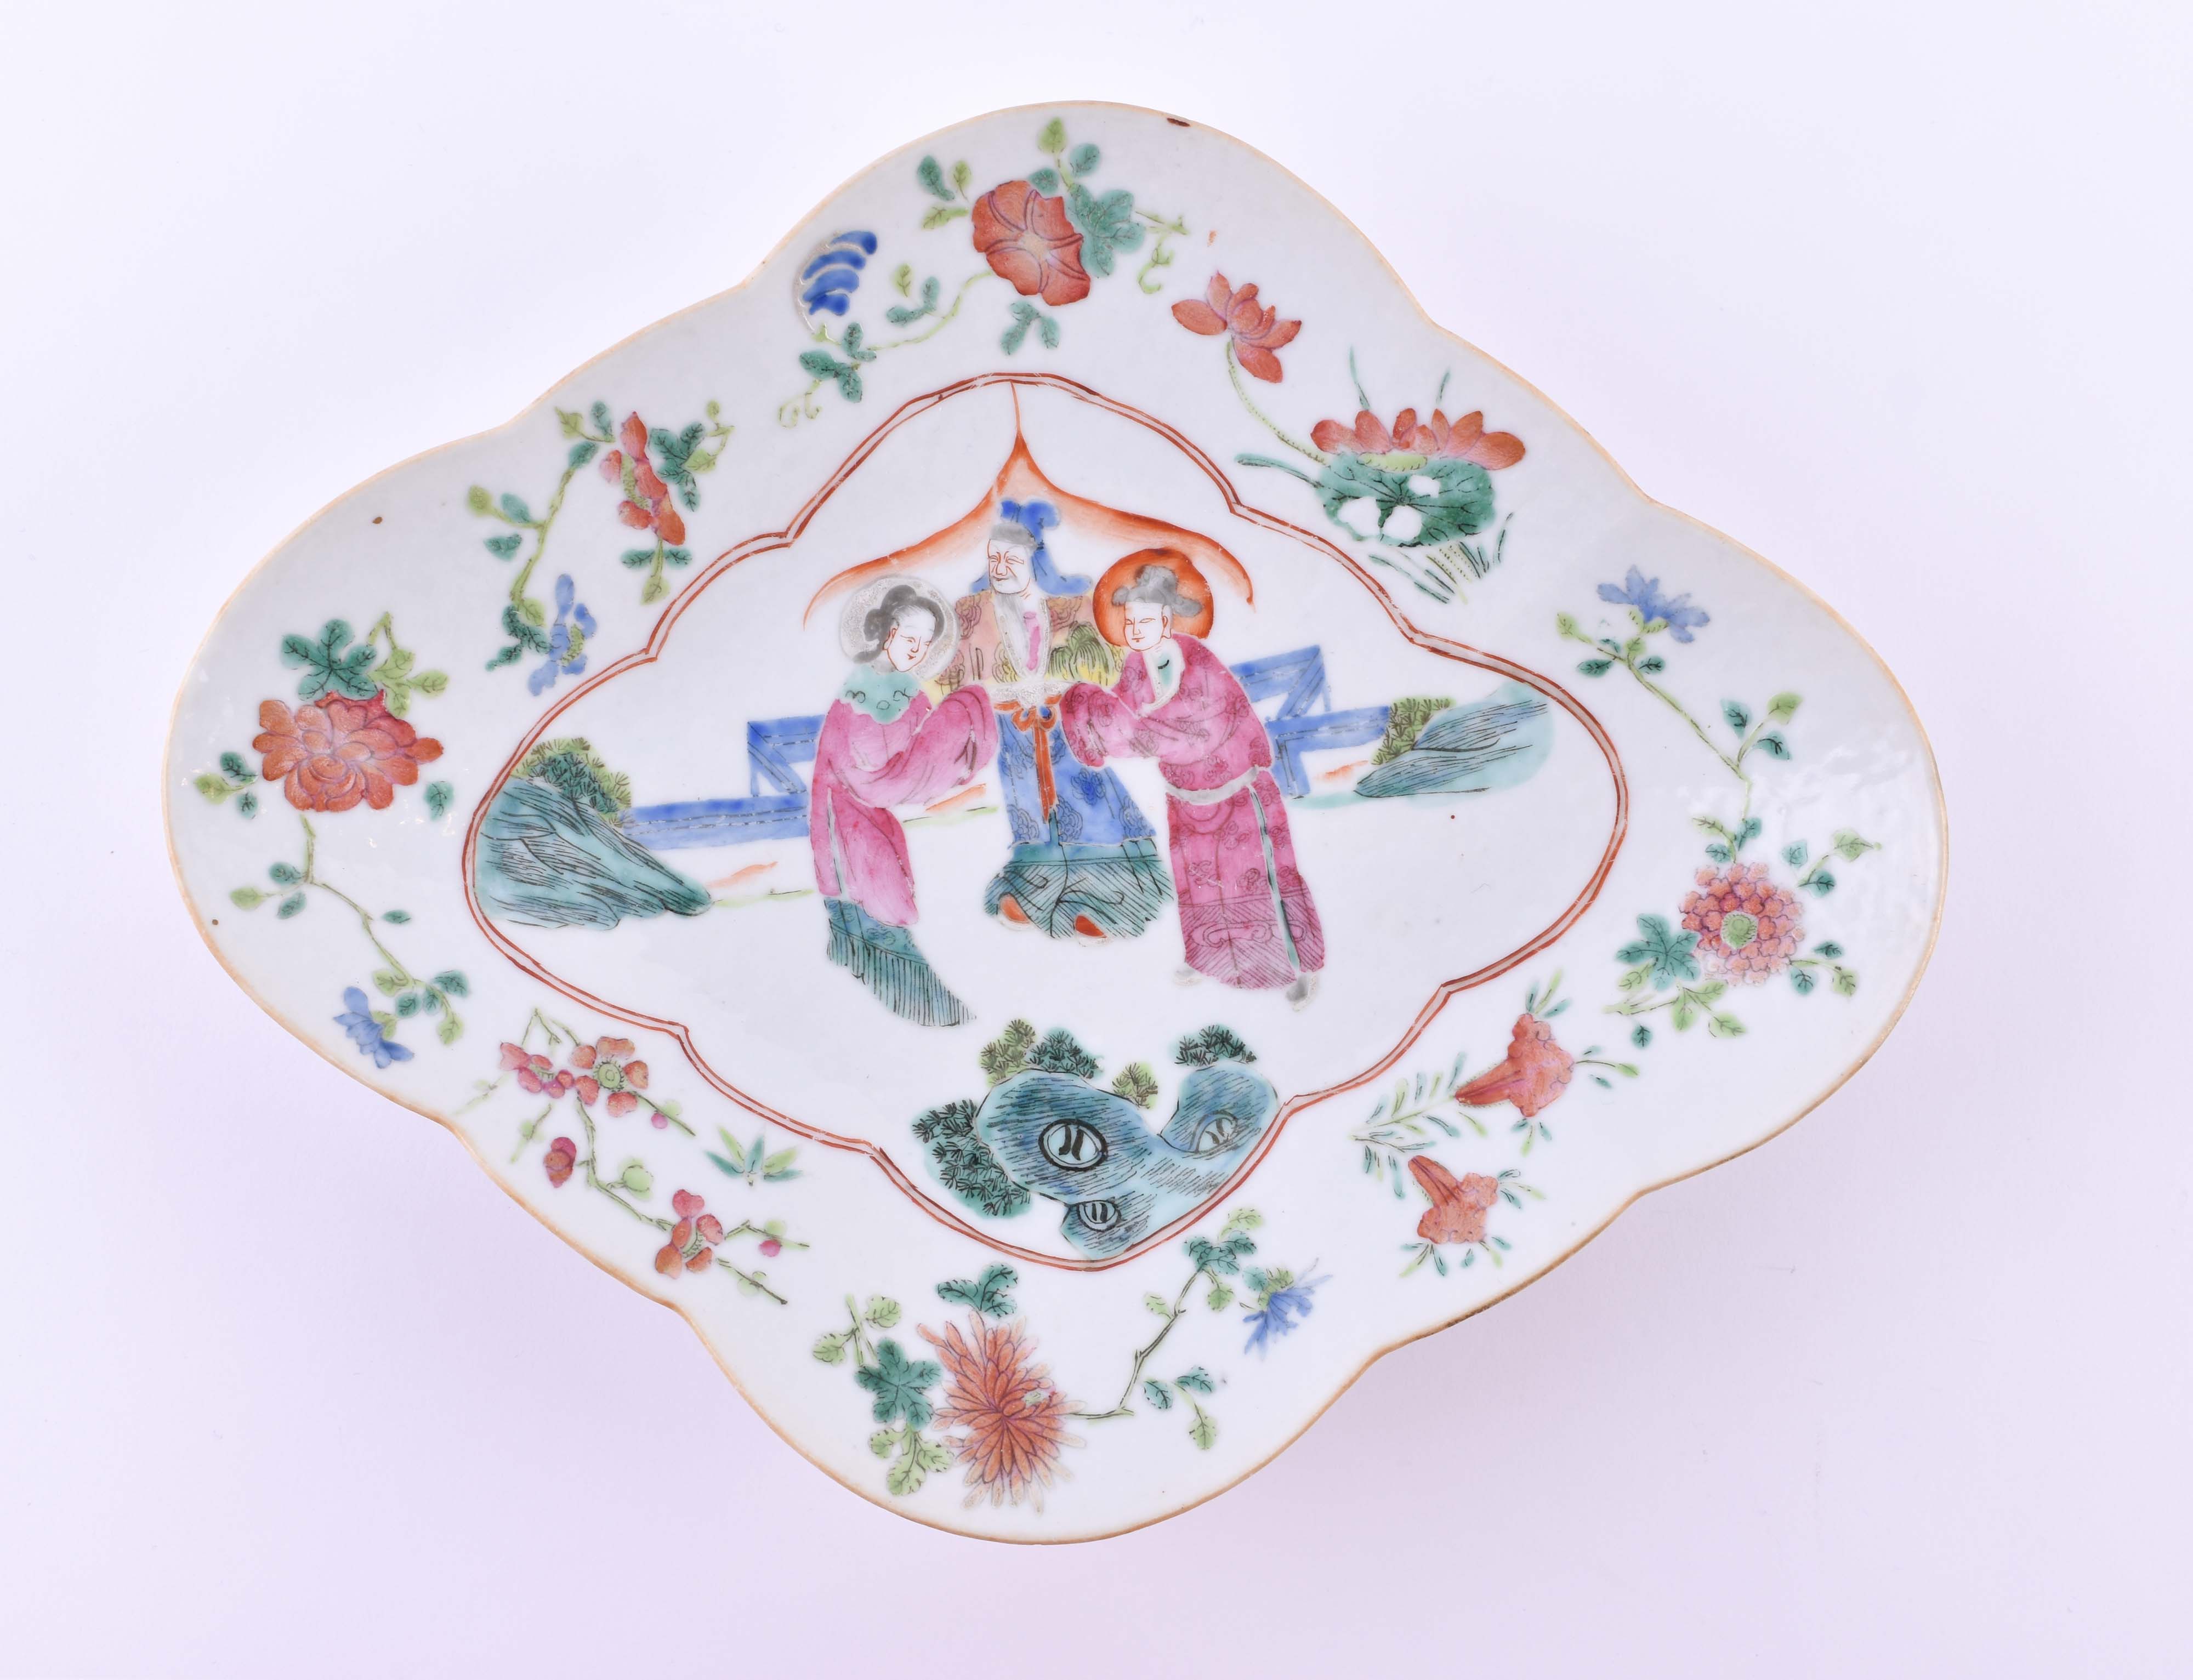  Footrest China Qing dynasty - Image 4 of 10